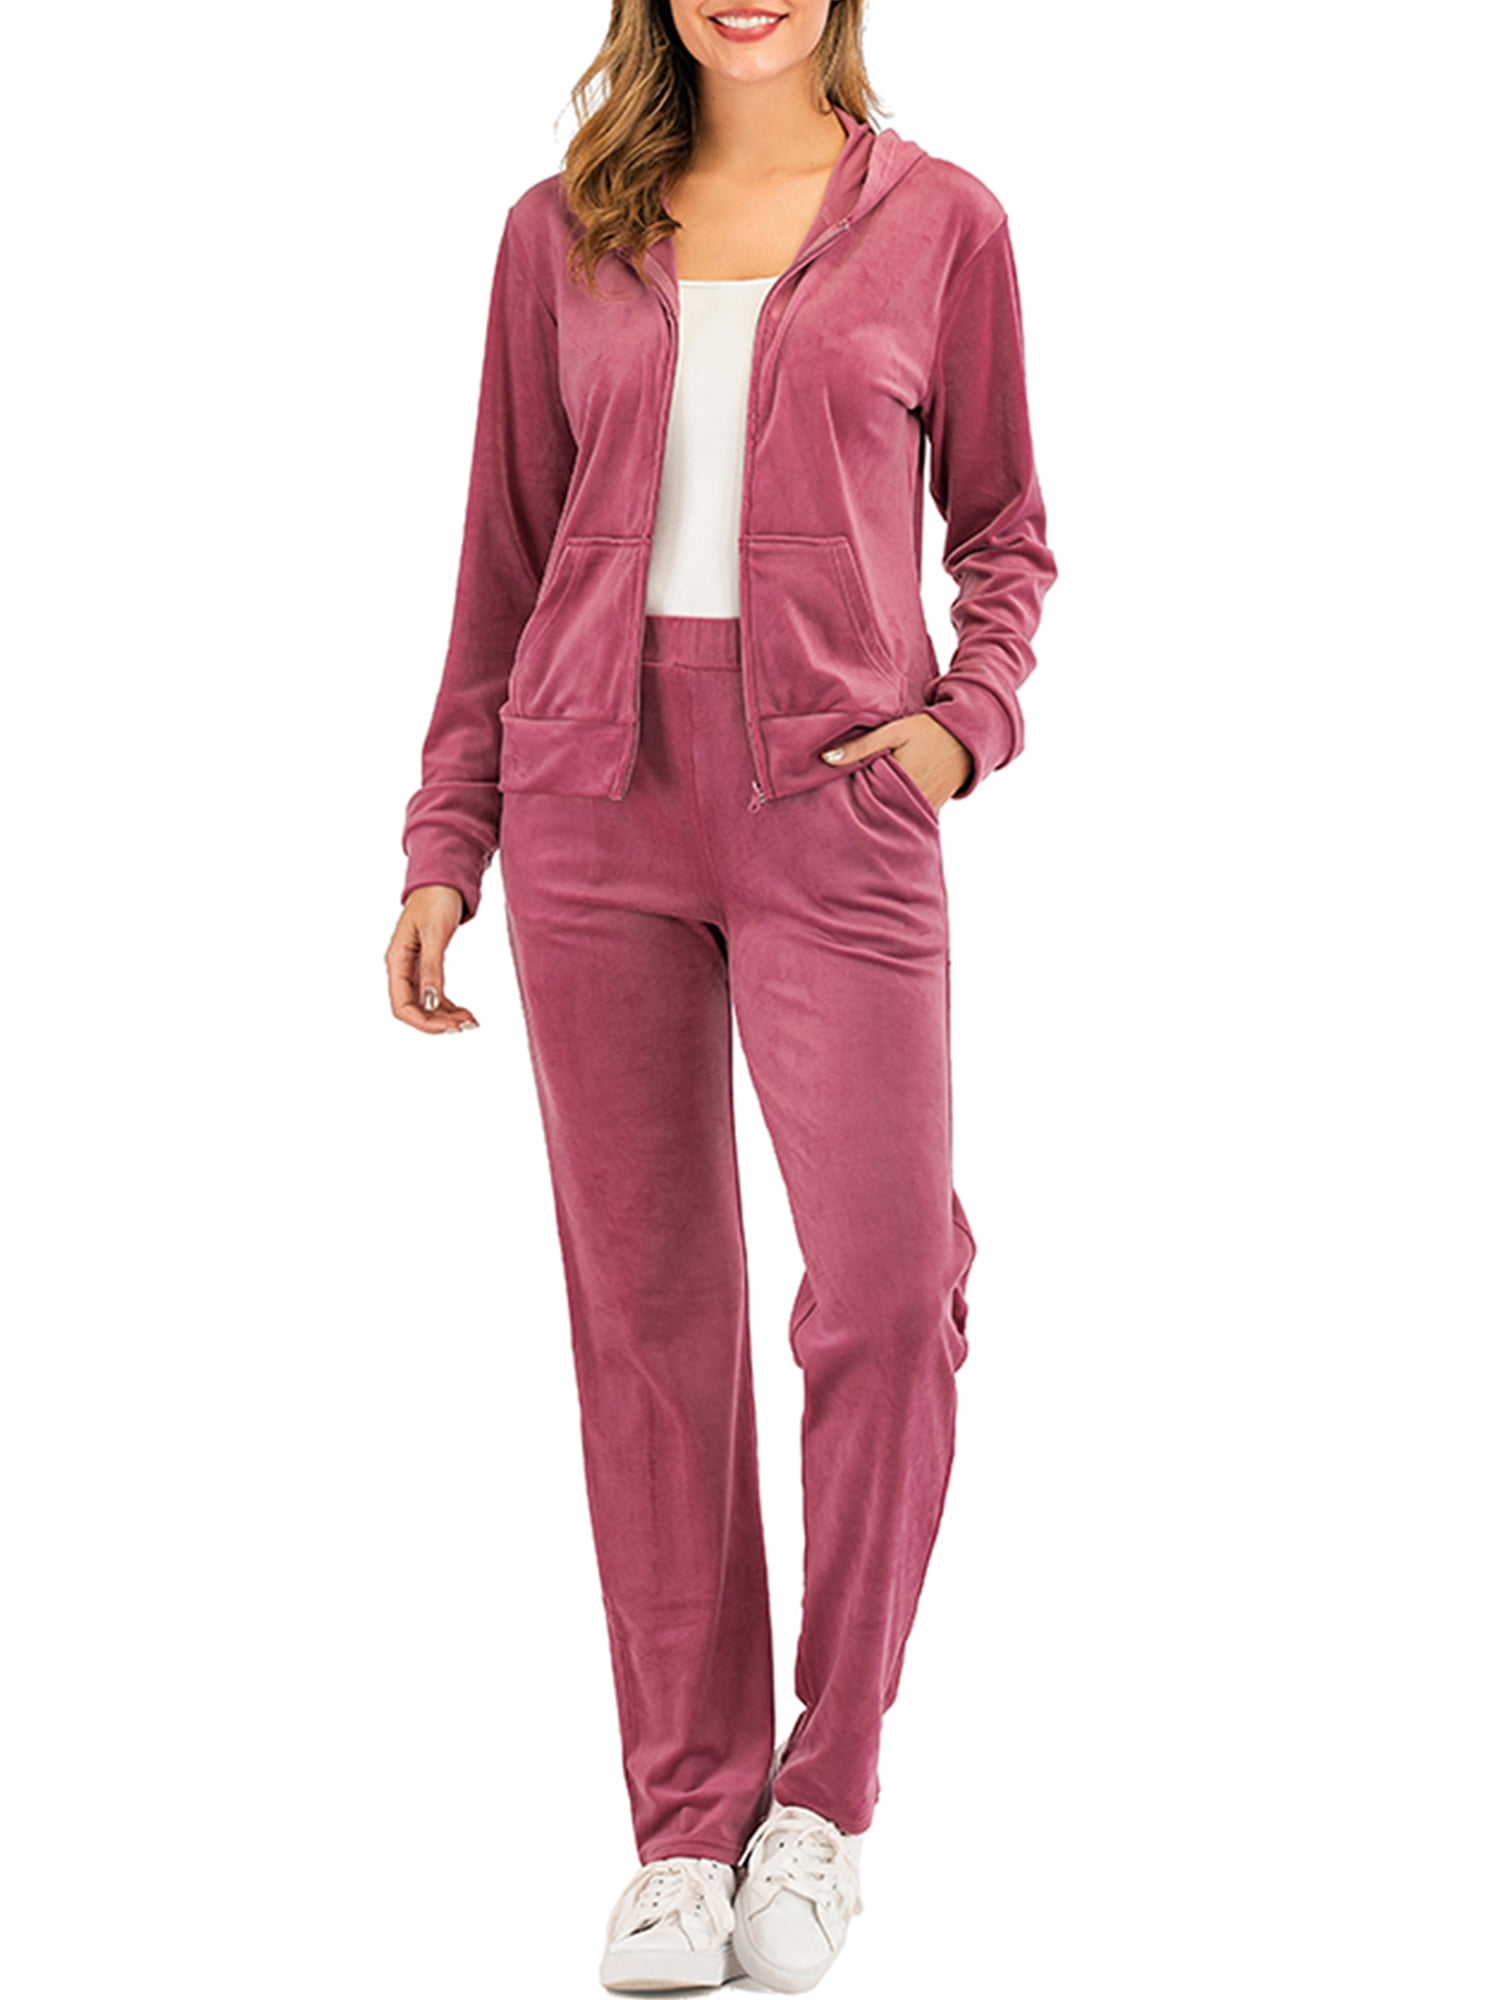 Irevial Women's Striped V Neck Velour Tracksuit Two Piece Sweatsuits Sets with Pocket 